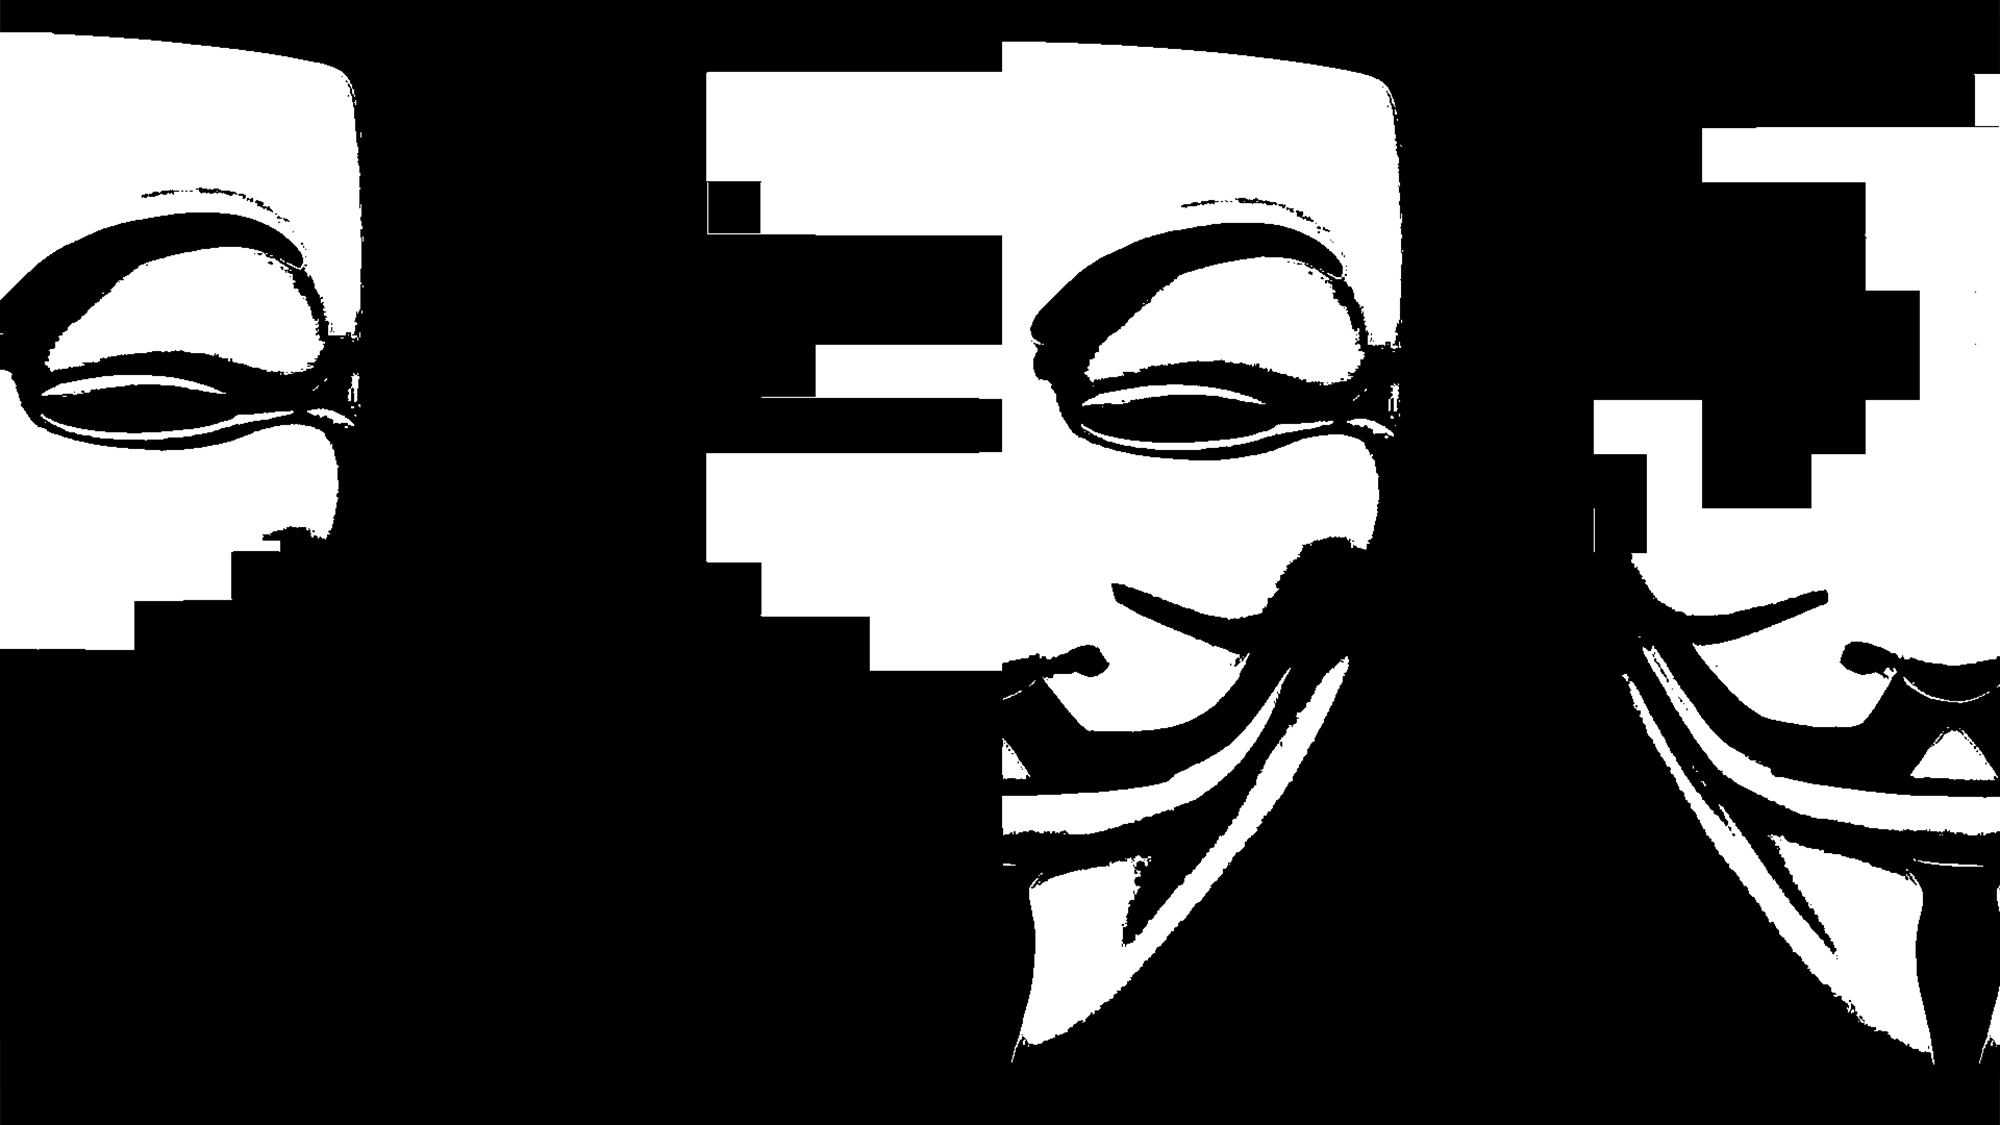 The Hacker Group Anonymous Returns The Atlantic - roblox bully story song 1 hour